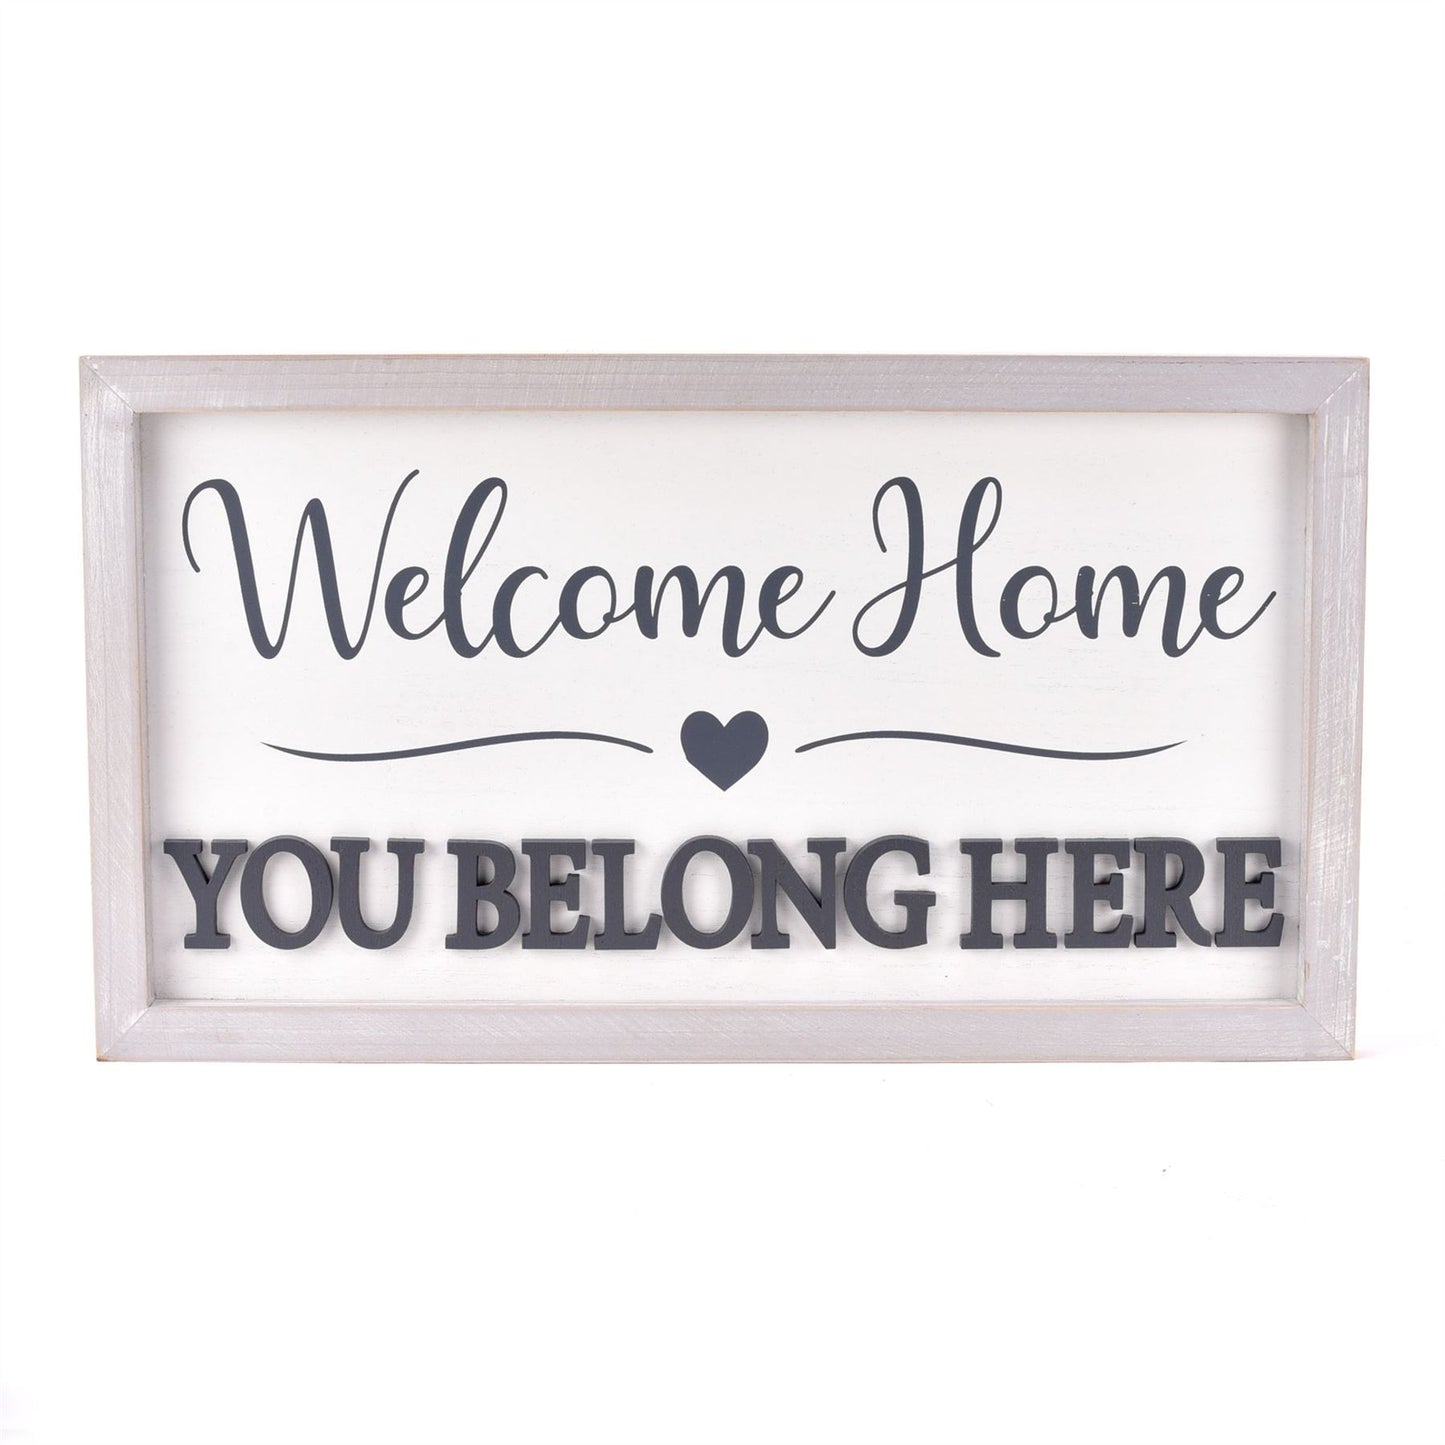 Hestia Wooden Wall Decor 'Welcome Home'